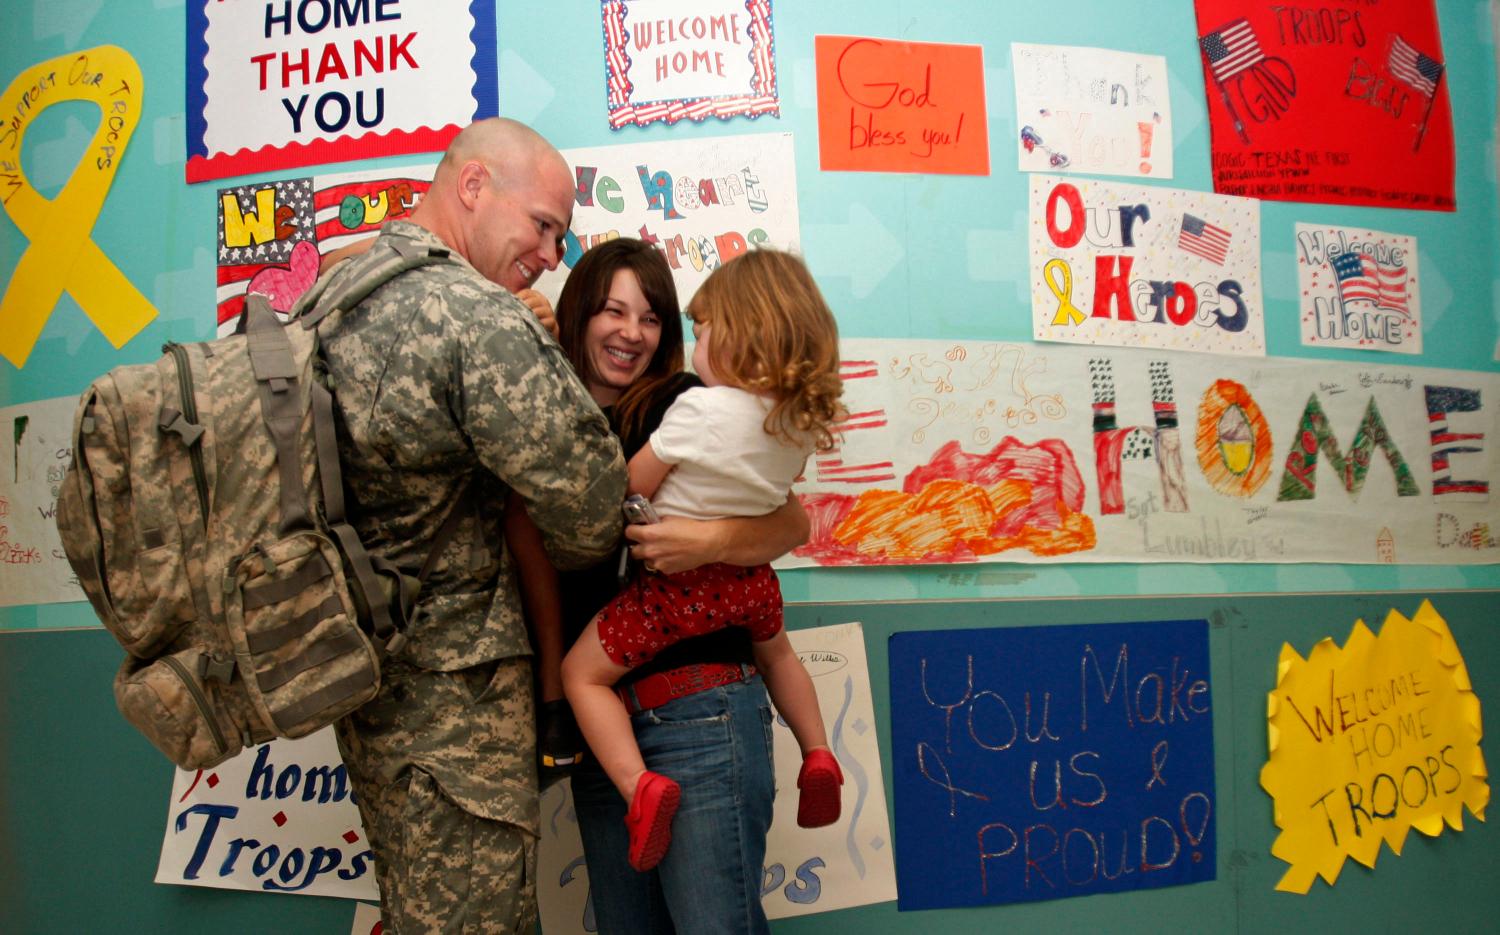 A military family reunites at DFW airport in Dallas, Texas, October 22, 2008. Among those struggling in the worst financial crisis since the Great Depression are members of the U.S. armed forces and their families. Picture taken October 22, 2008. To match feature FINANCIAL/MILITARY REUTERS/Jessica Rinaldi (UNITED STATES) - GM1E4AS1CUD01